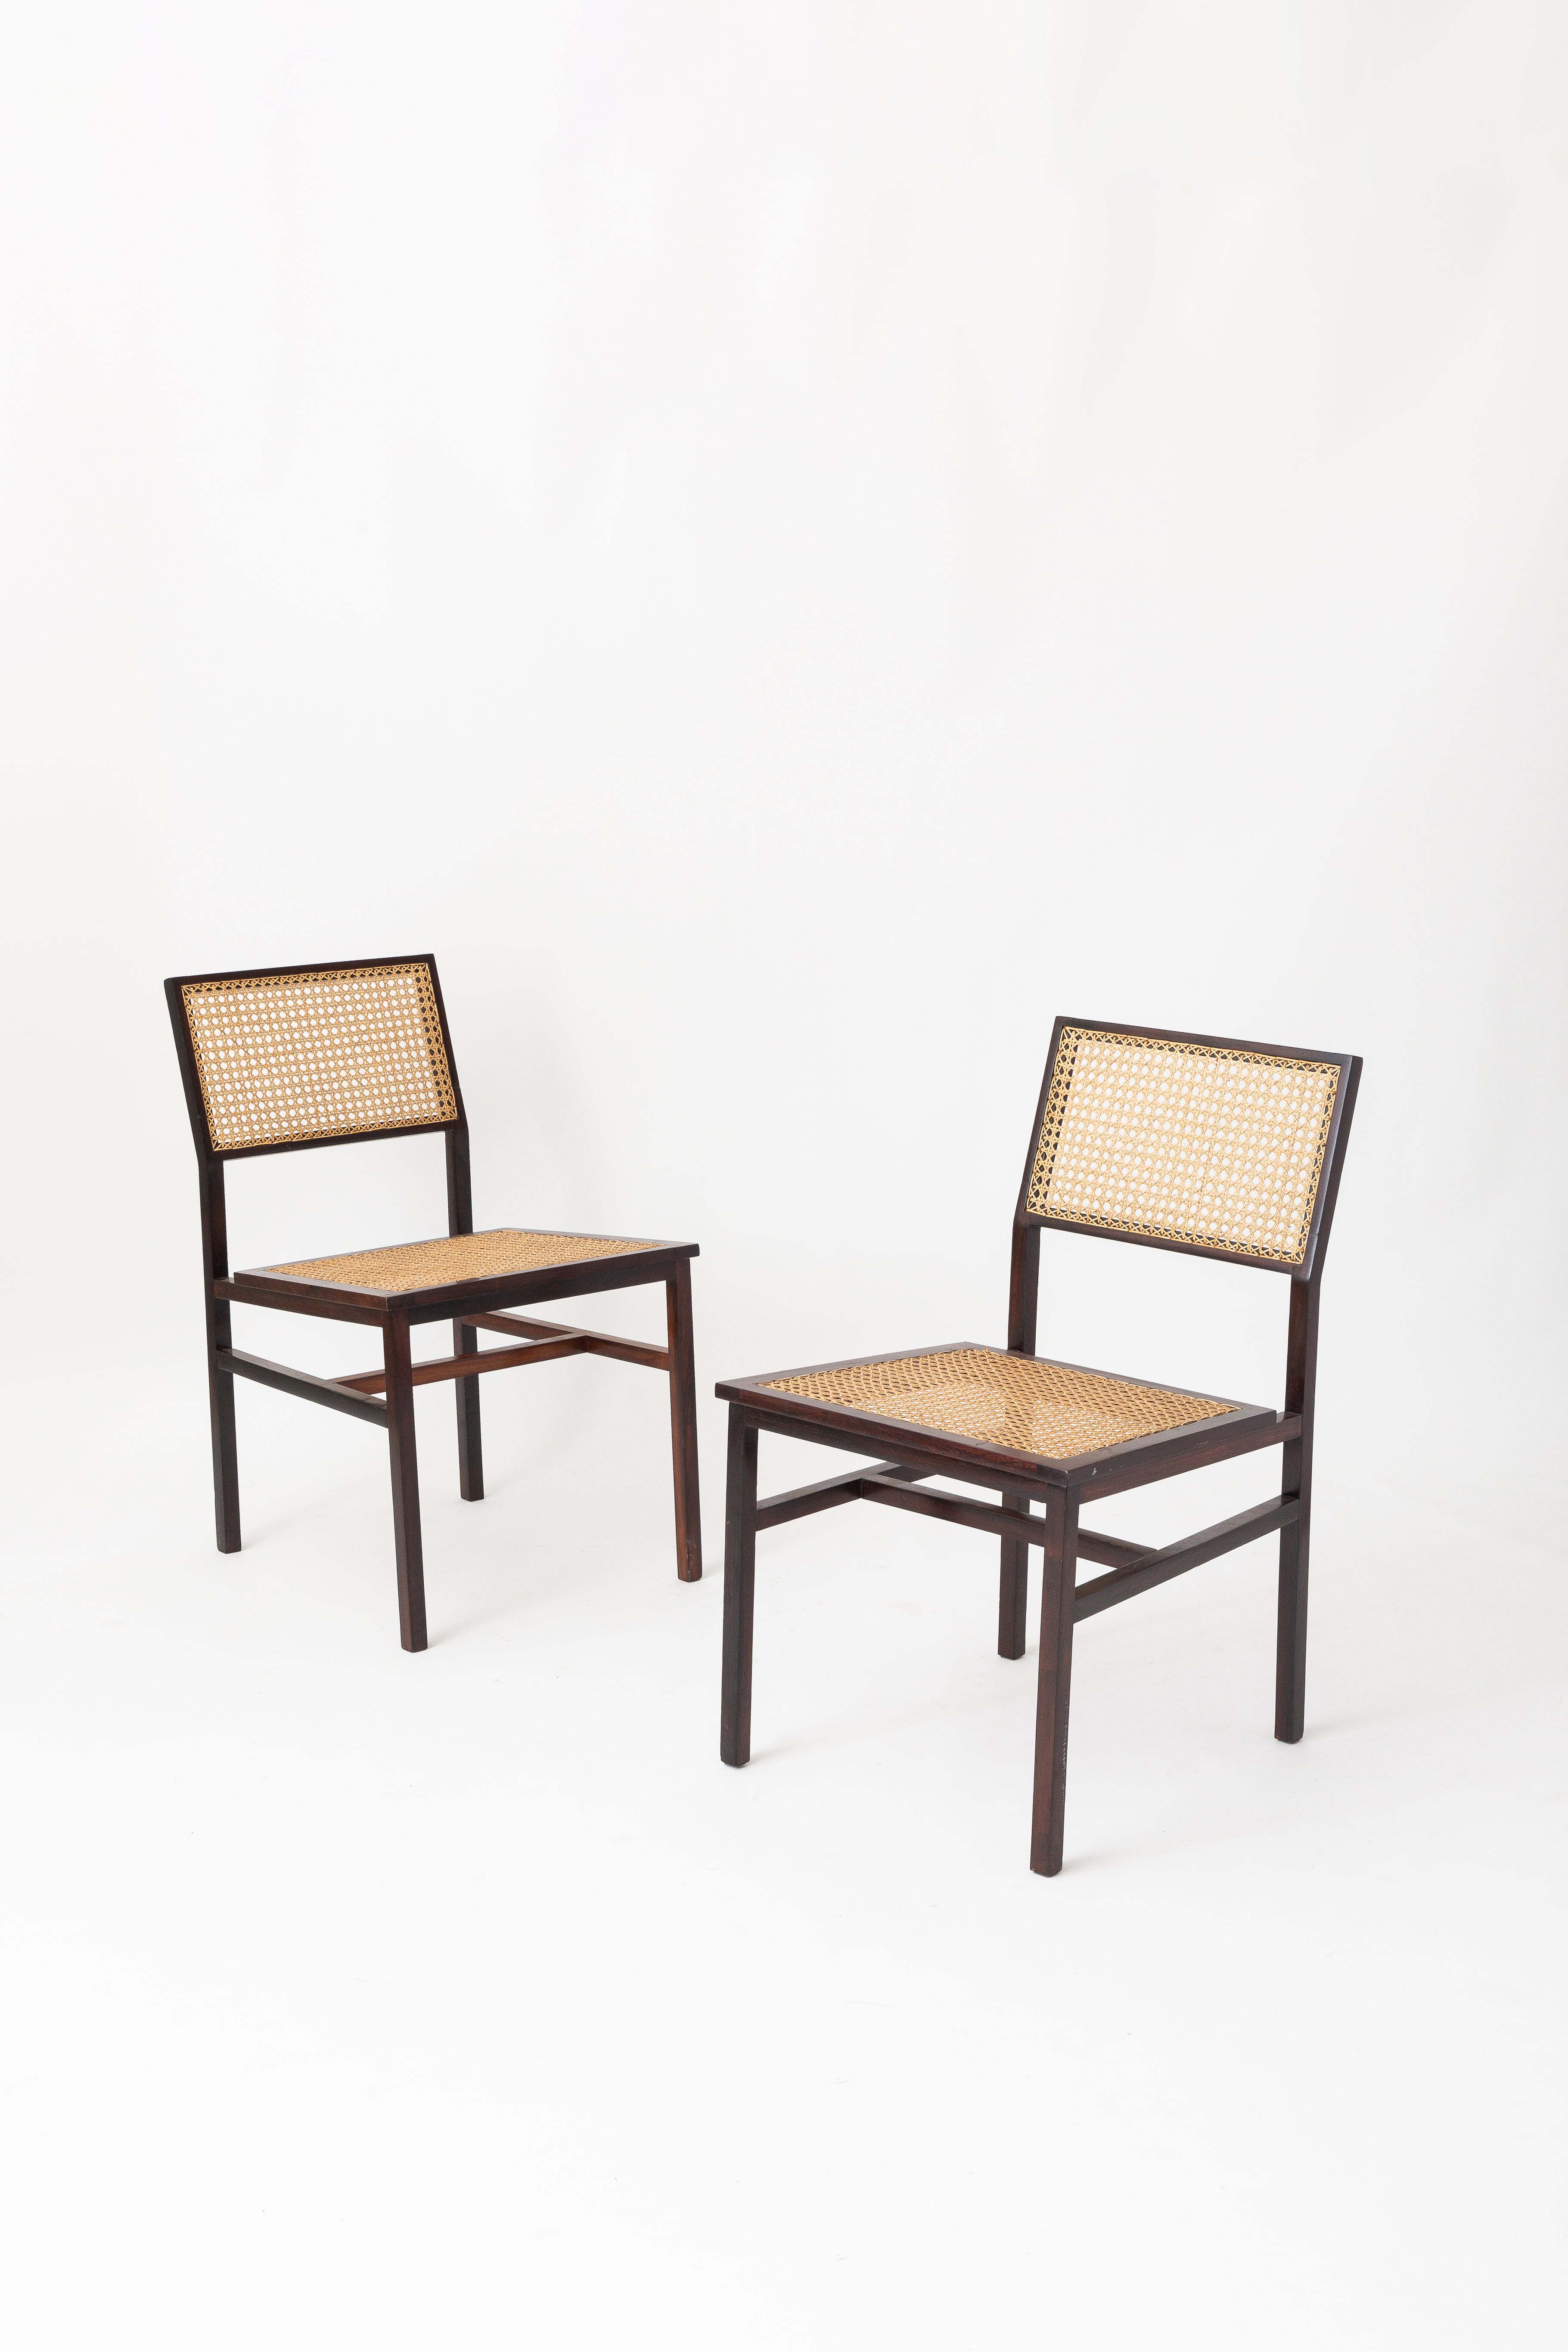 Tenreiro pair of wood and cane chairs (with original label) For Sale